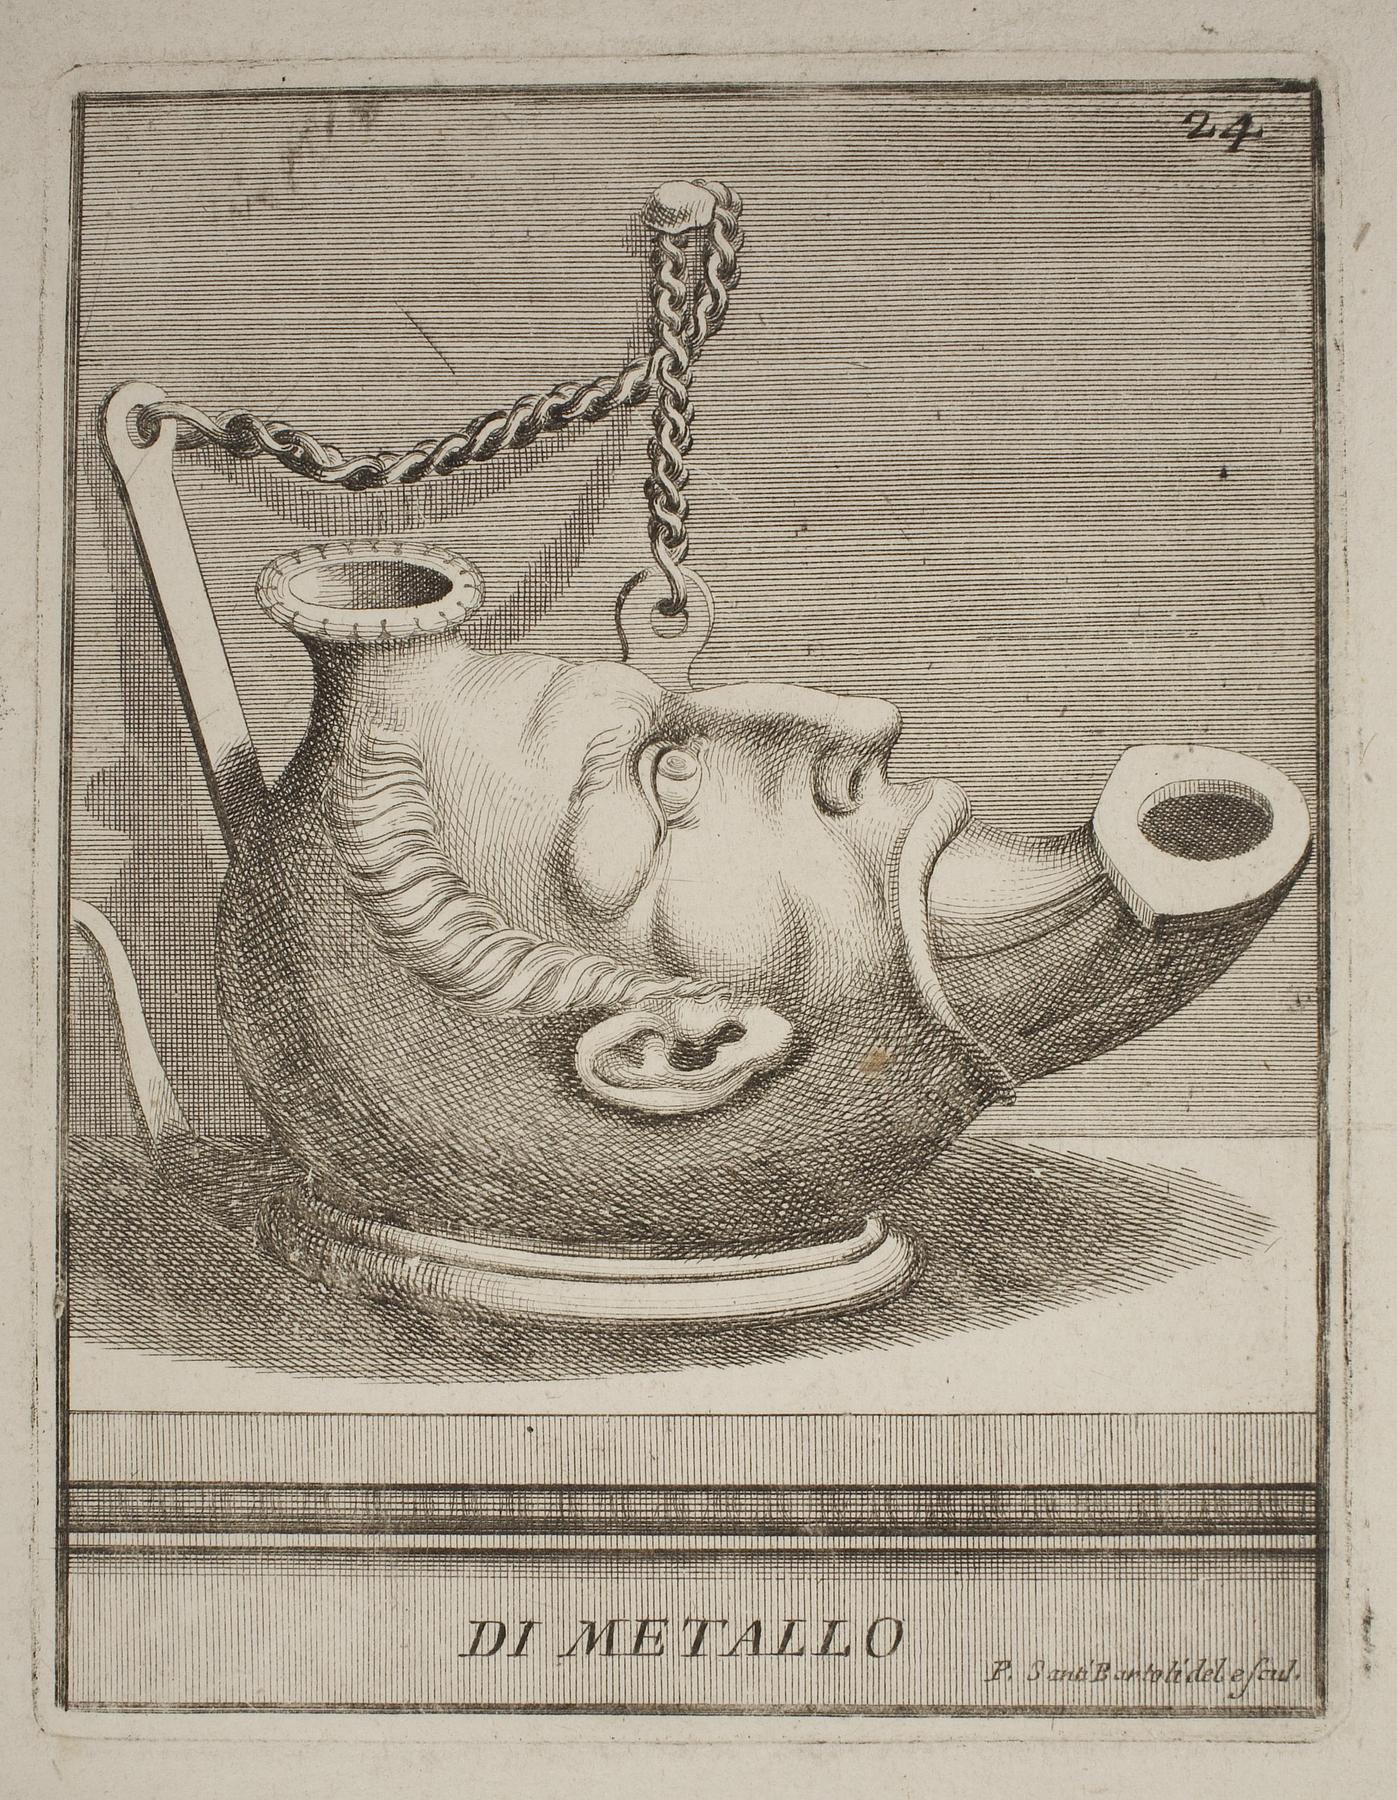 Lamp in the shape of a man's head, E1534